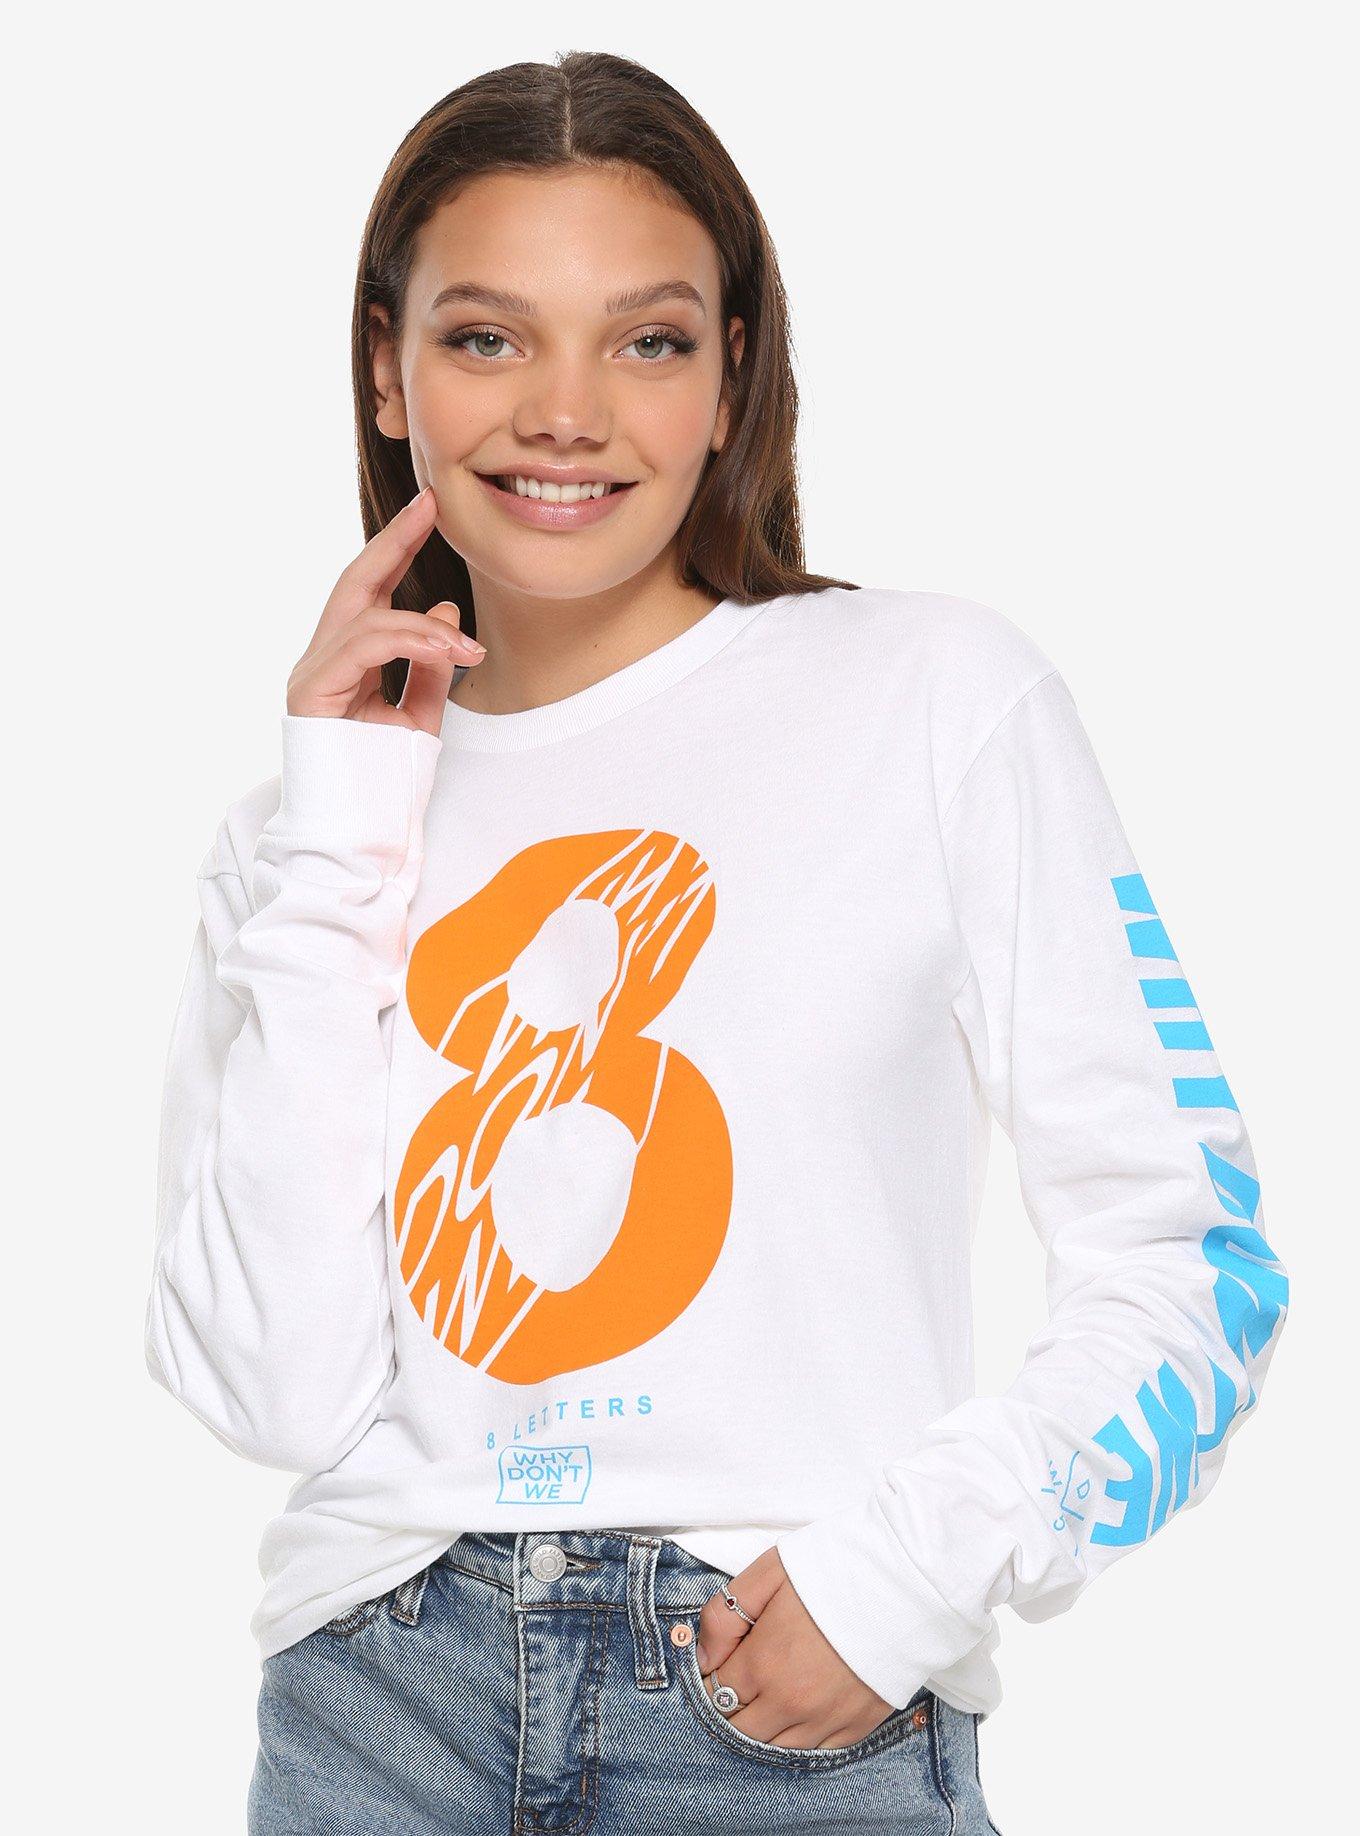 Why Don't We 8 Letters Girls Long-Sleeve T-Shirt, WHITE, hi-res